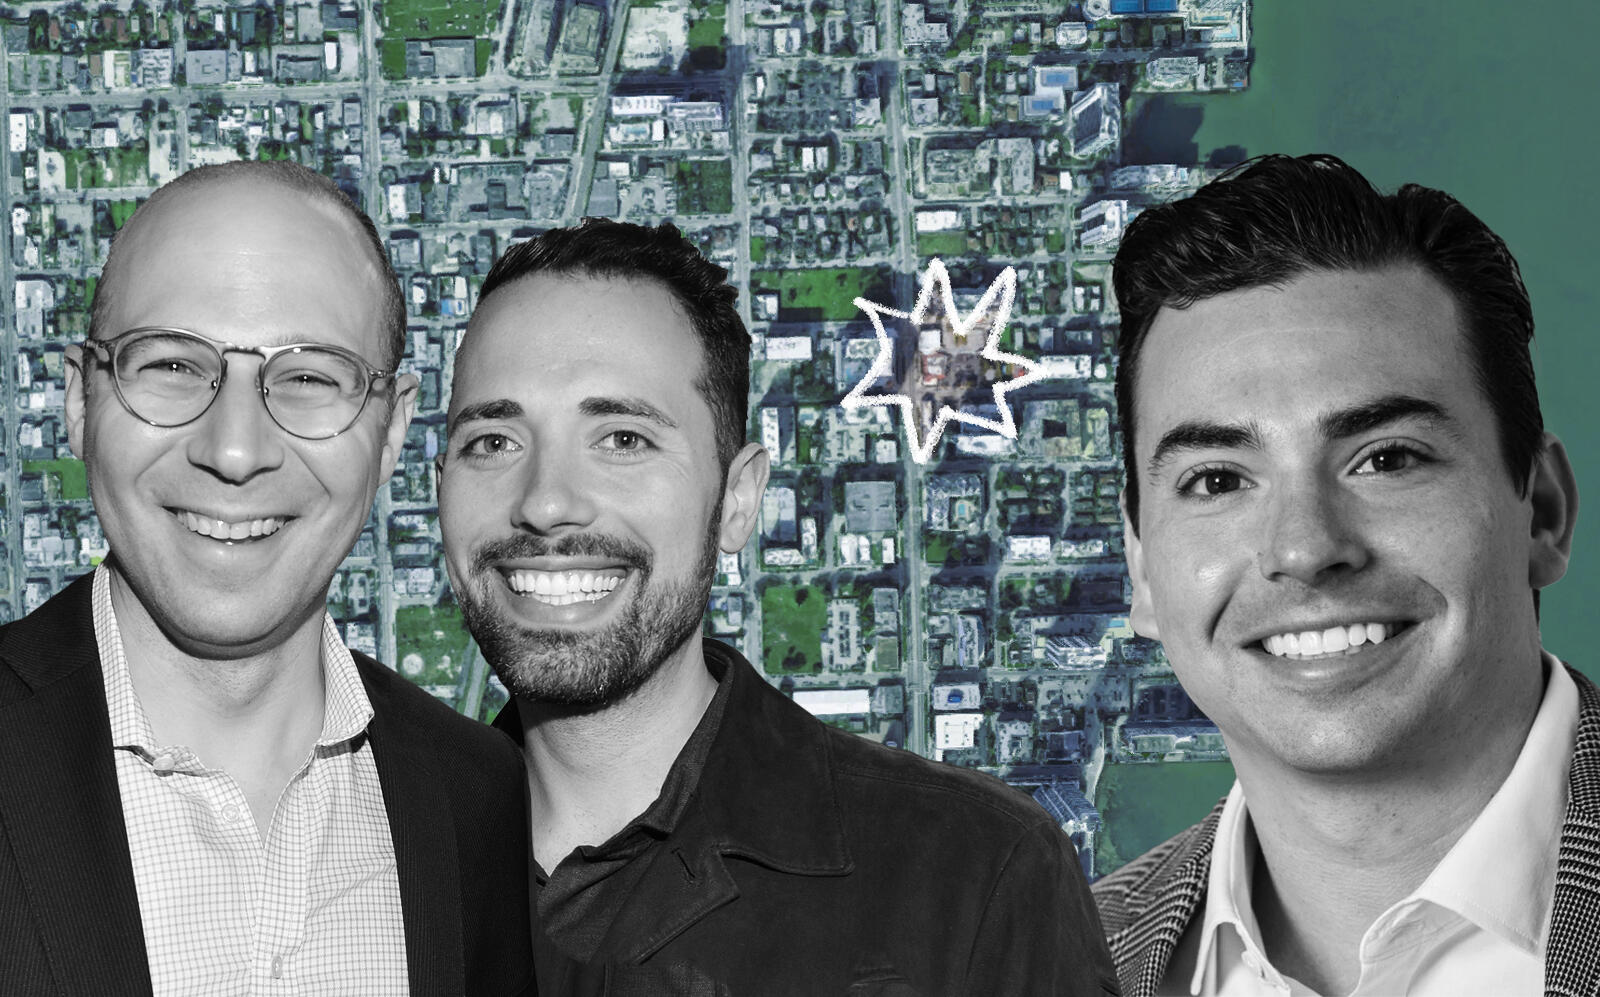 Arch Companies founders Jeffrey Simpson, Jared Chassen and Infinity's David Berg. (Google Maps, Infinity, Getty)